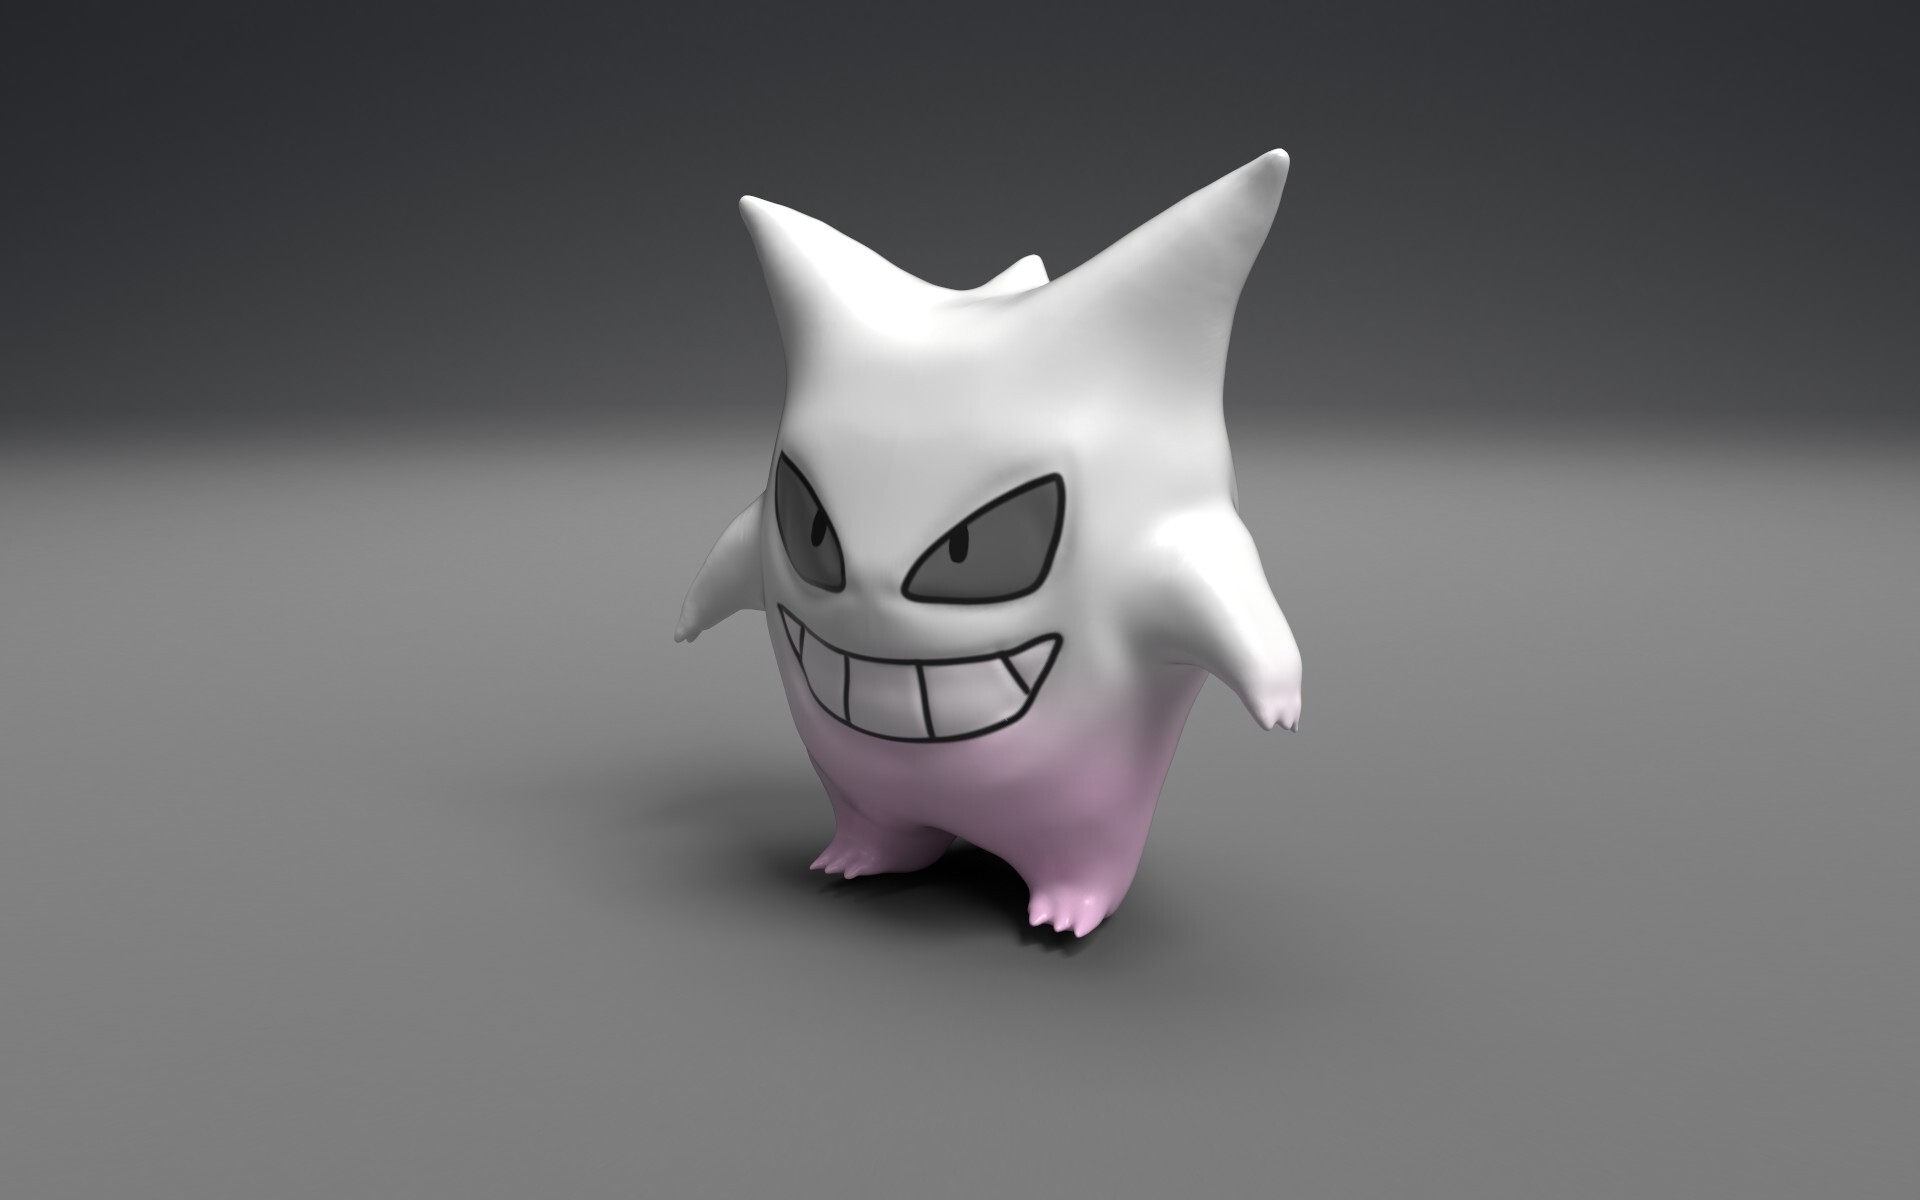 Got some new Pokemon prints coming soon! Had to do a shiny Gengar